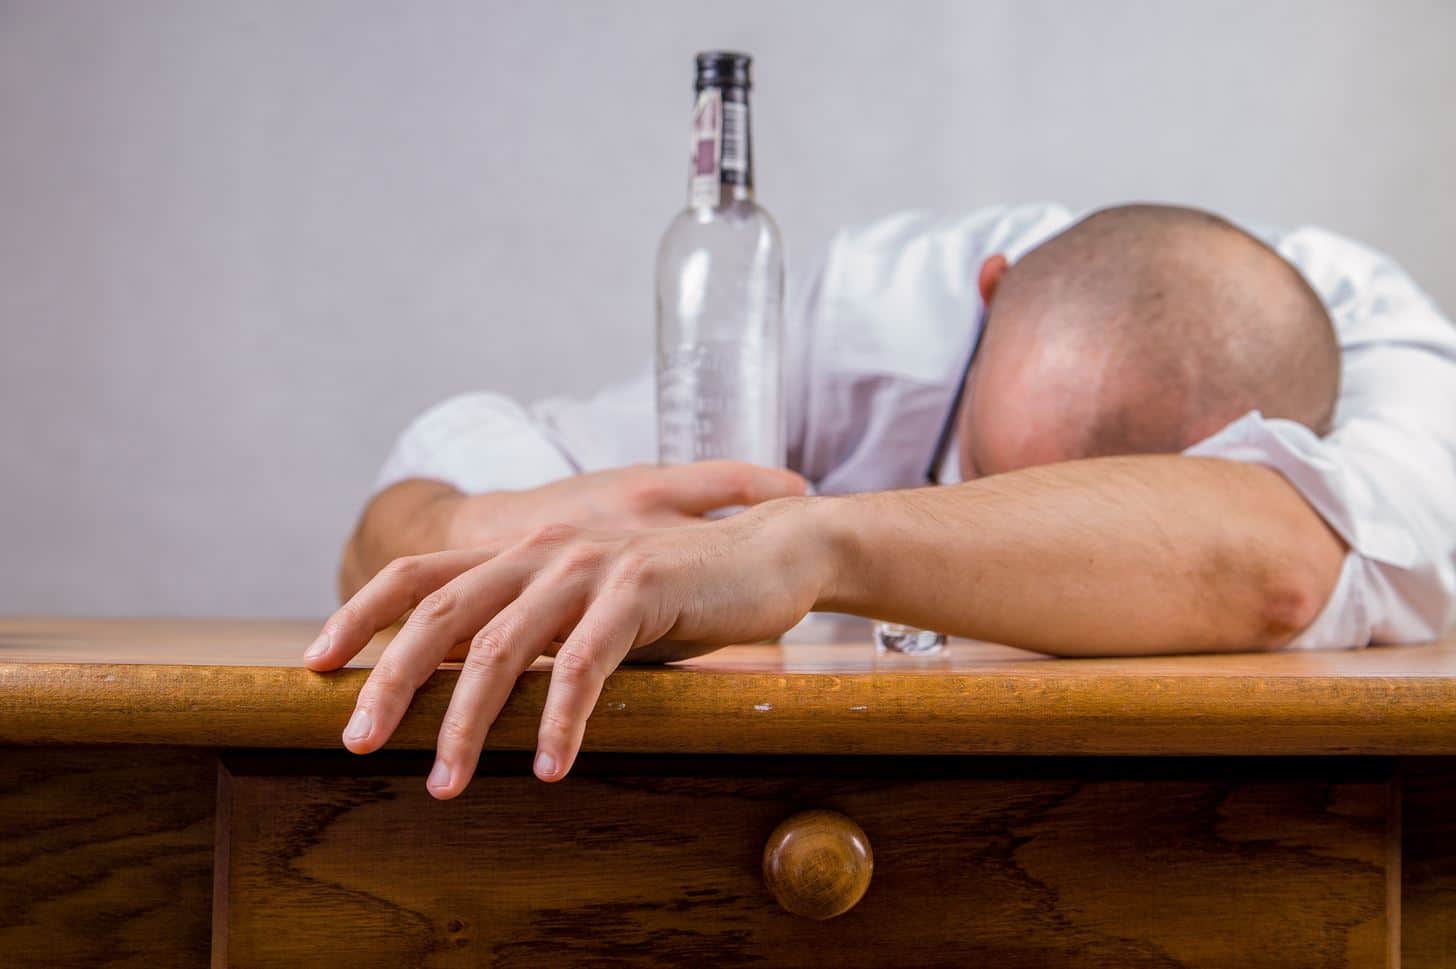 4 Ways to Avoid Alcohol and Make Yourself Healthier and Happier